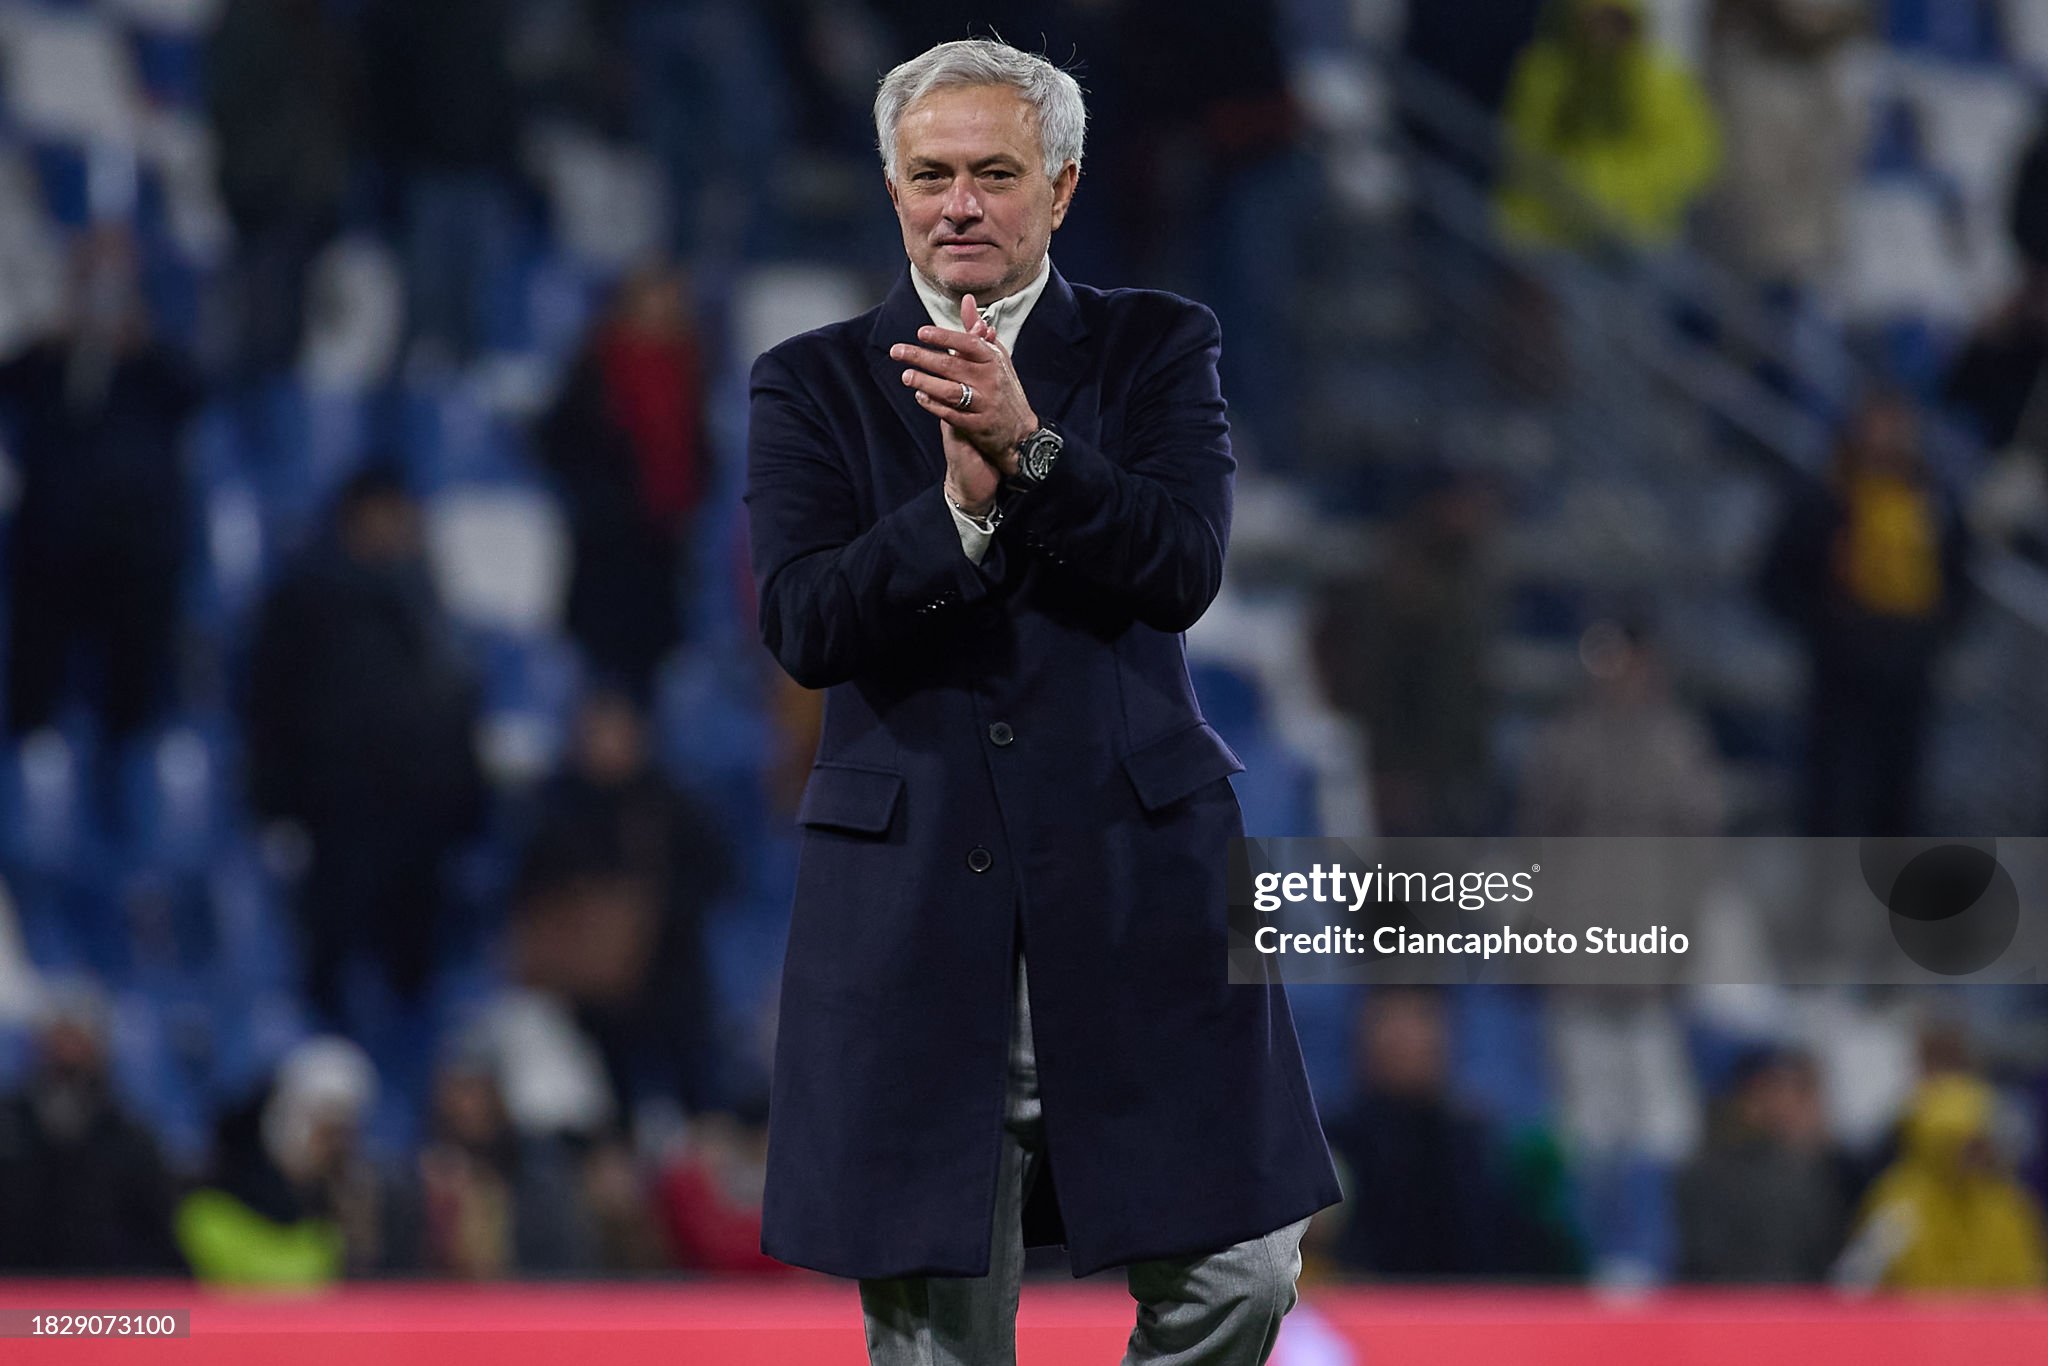 Mourinho switches to Portuguese: 'Apparently my Italian is not good enough'